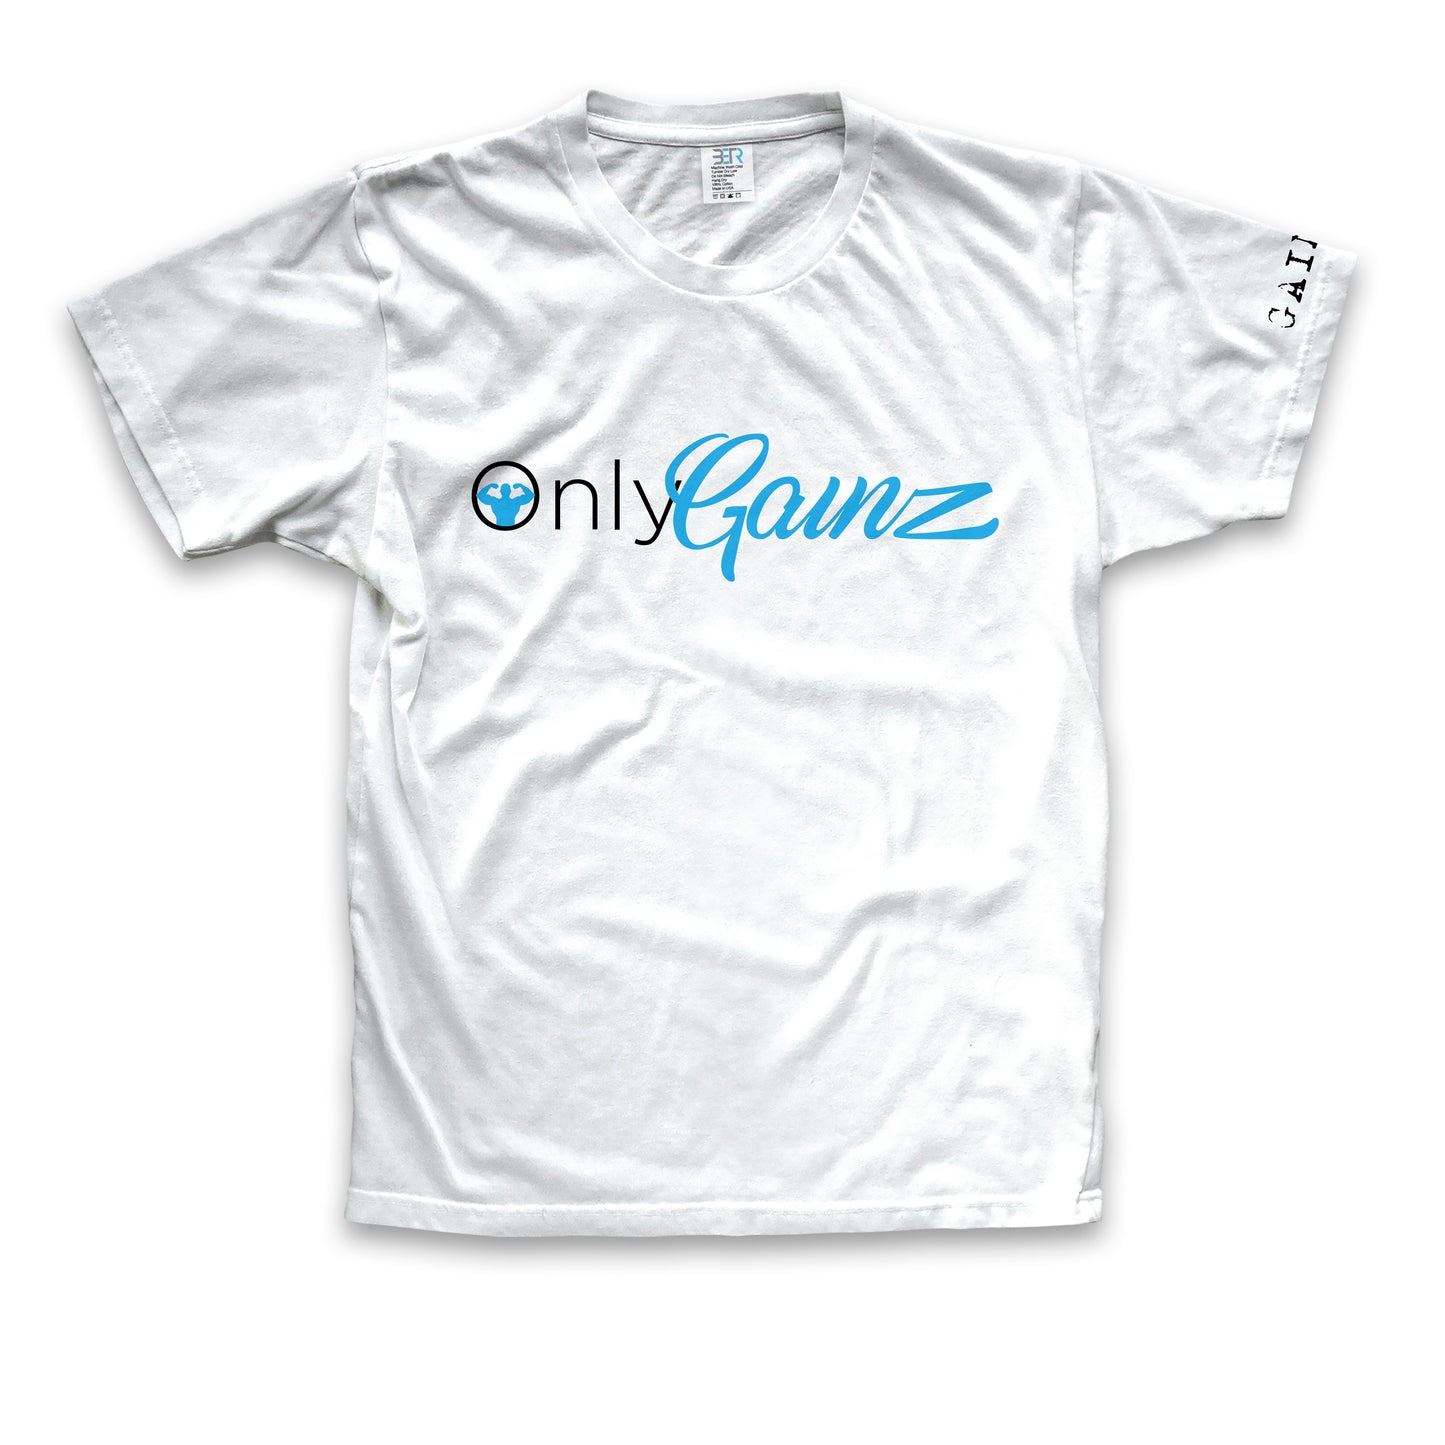 Only Gainz tee